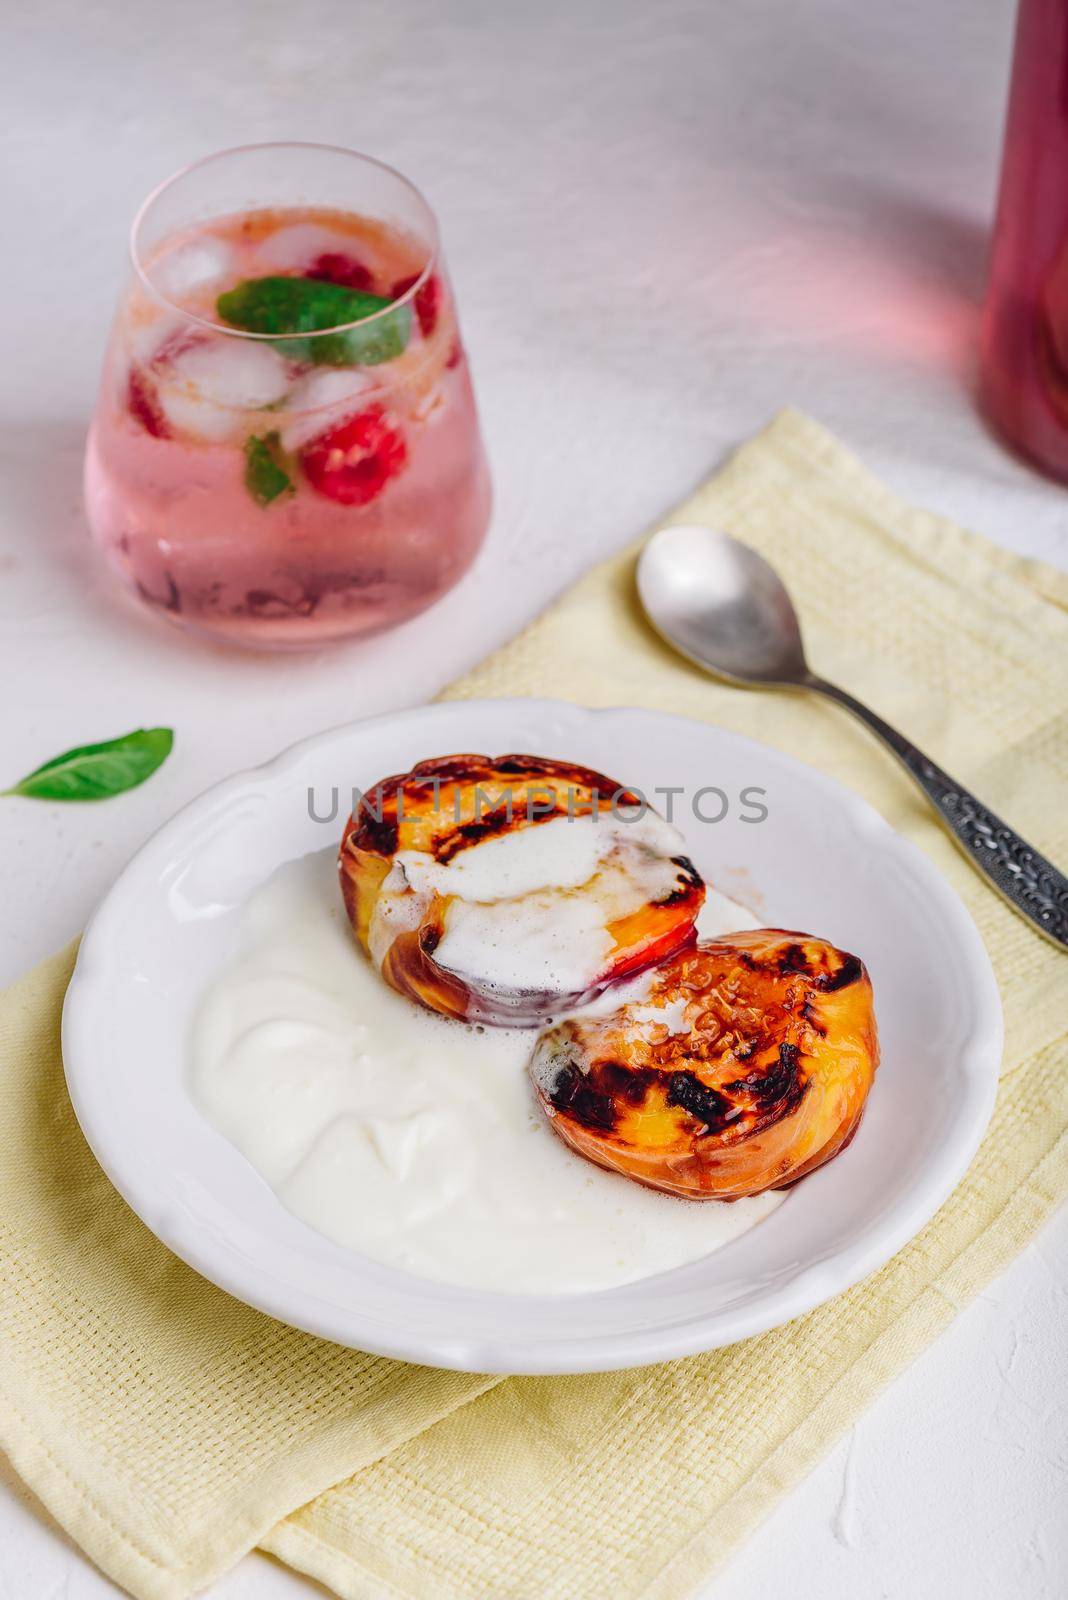 Oven Roasted Peaches with Honey by Seva_blsv